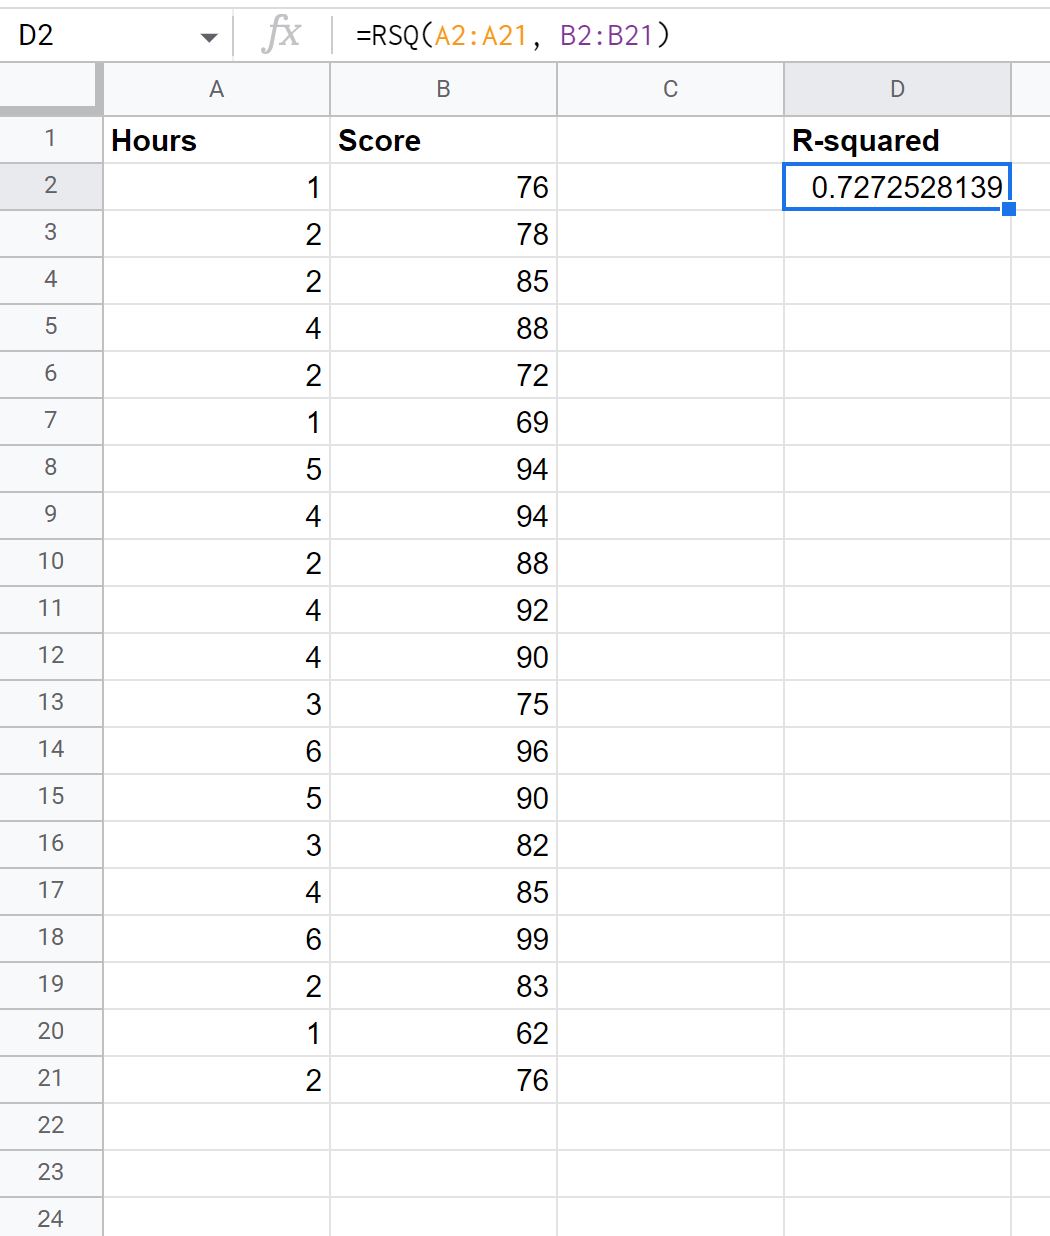 R-squared in Google Sheets